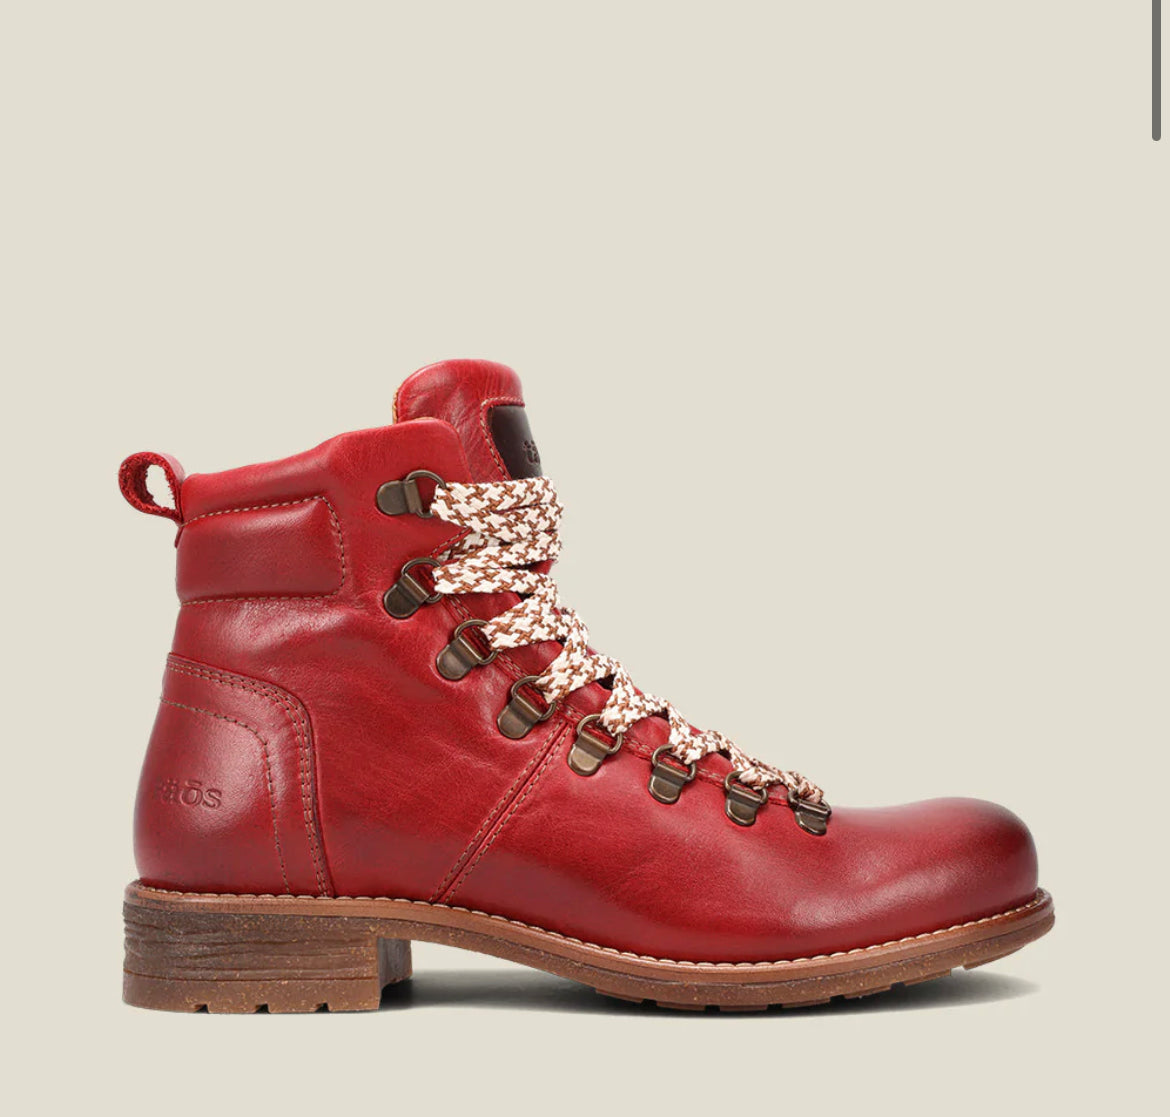 Taos Alpine Boot Red - All Mixed Up 